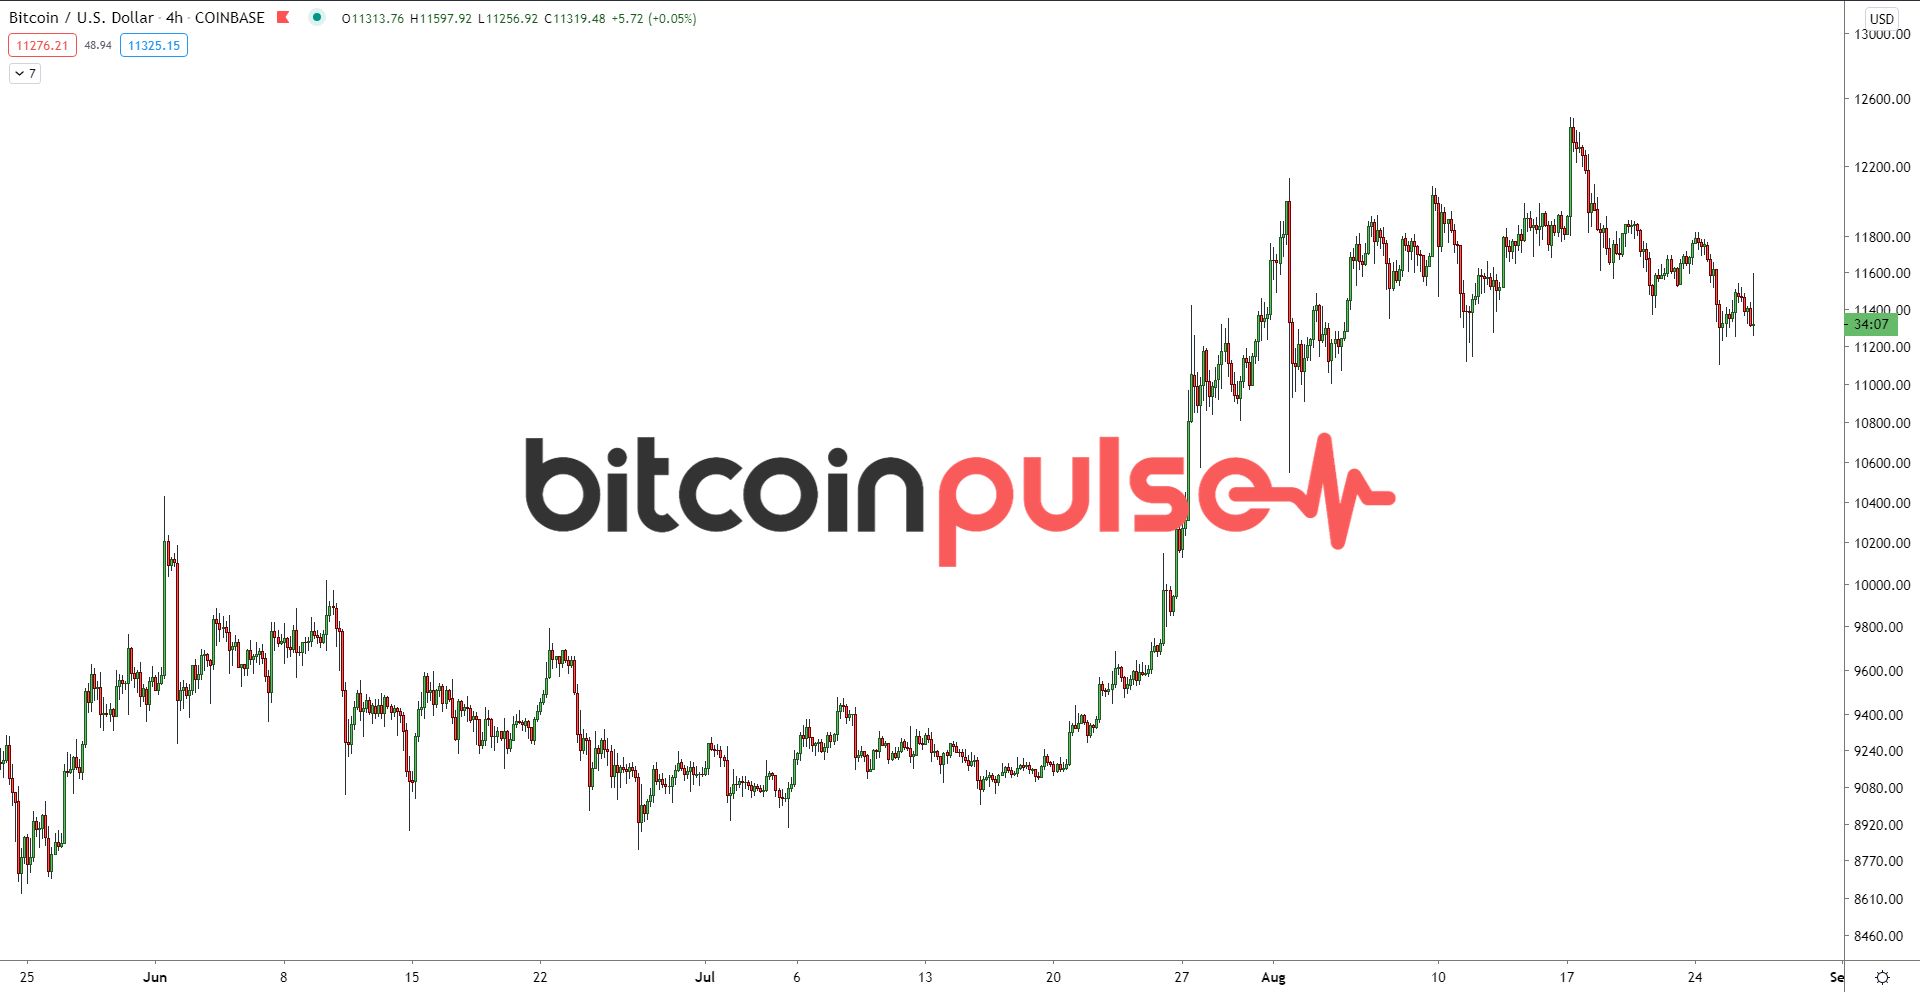 Market Structure Deteriorates, Show of Force Needed by Bulls - Bitcoin Pulse #3